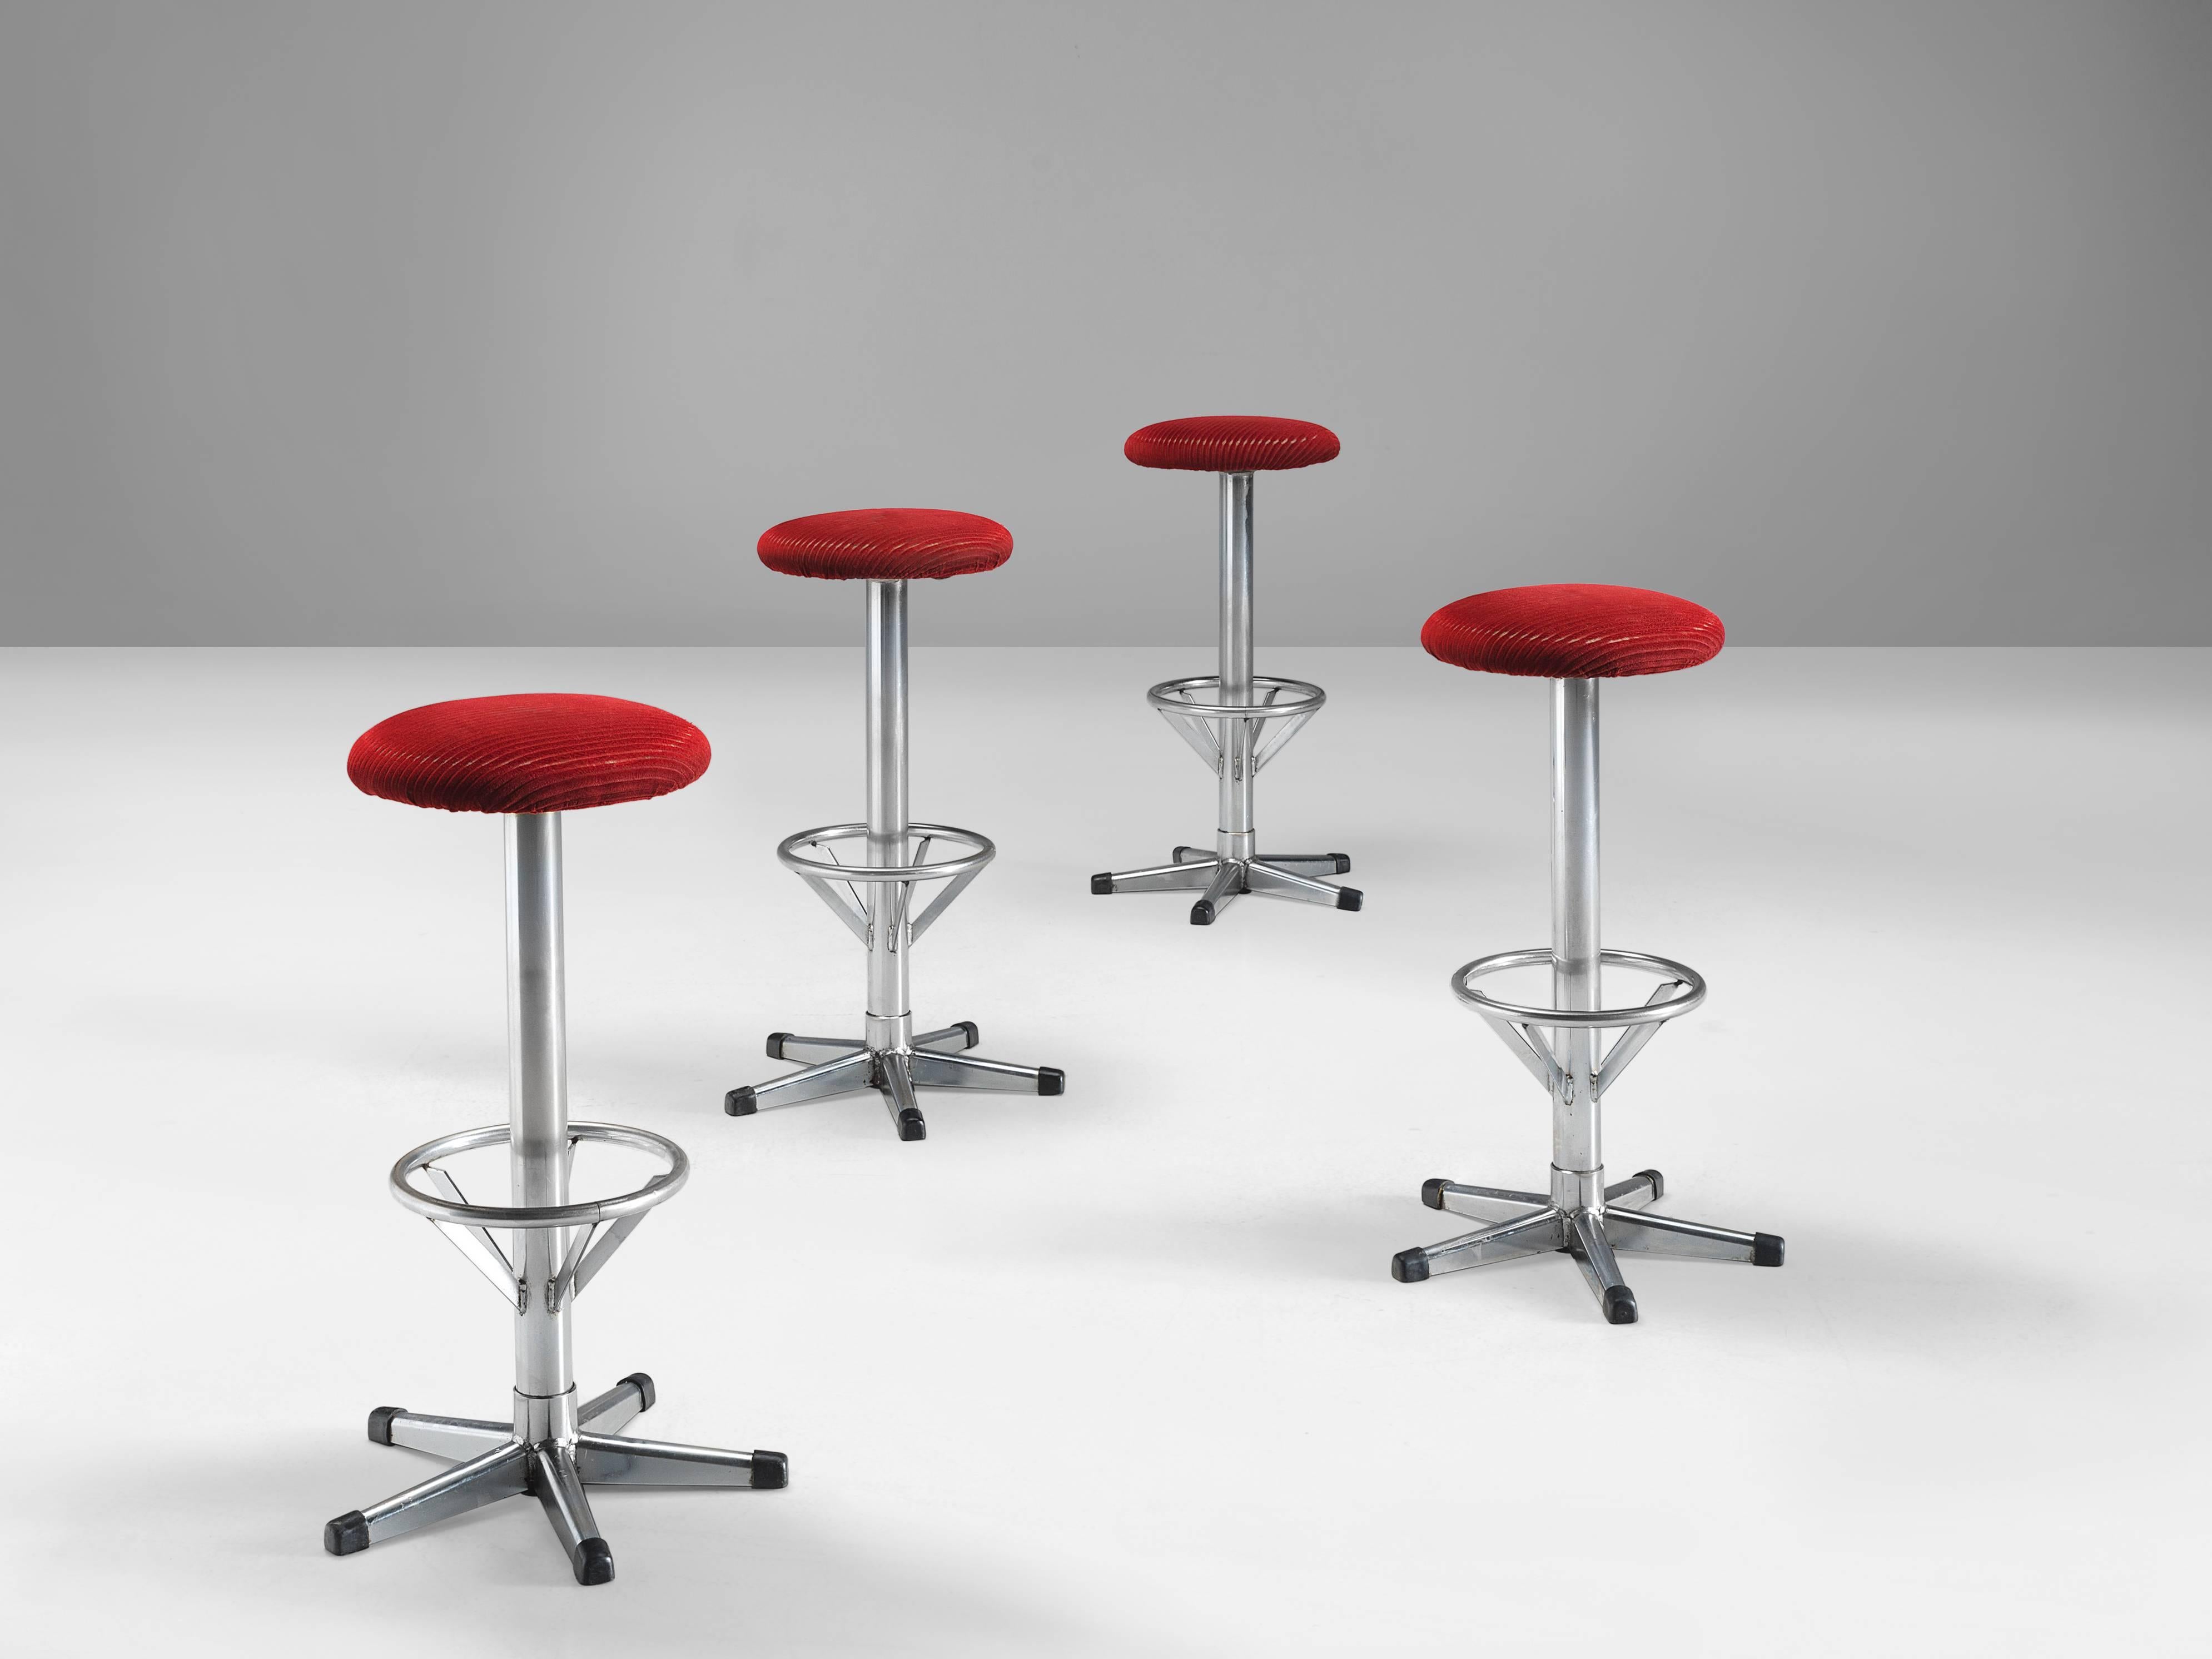 Bar stools, metal, velvet, Europe, 1970s.

Highly comfortable high barstools in red velvet upholstery. Due to the soft seat and back, these chairs provide a very pleasant seating comfort. The five-legged footrest emphasizes the functional design.